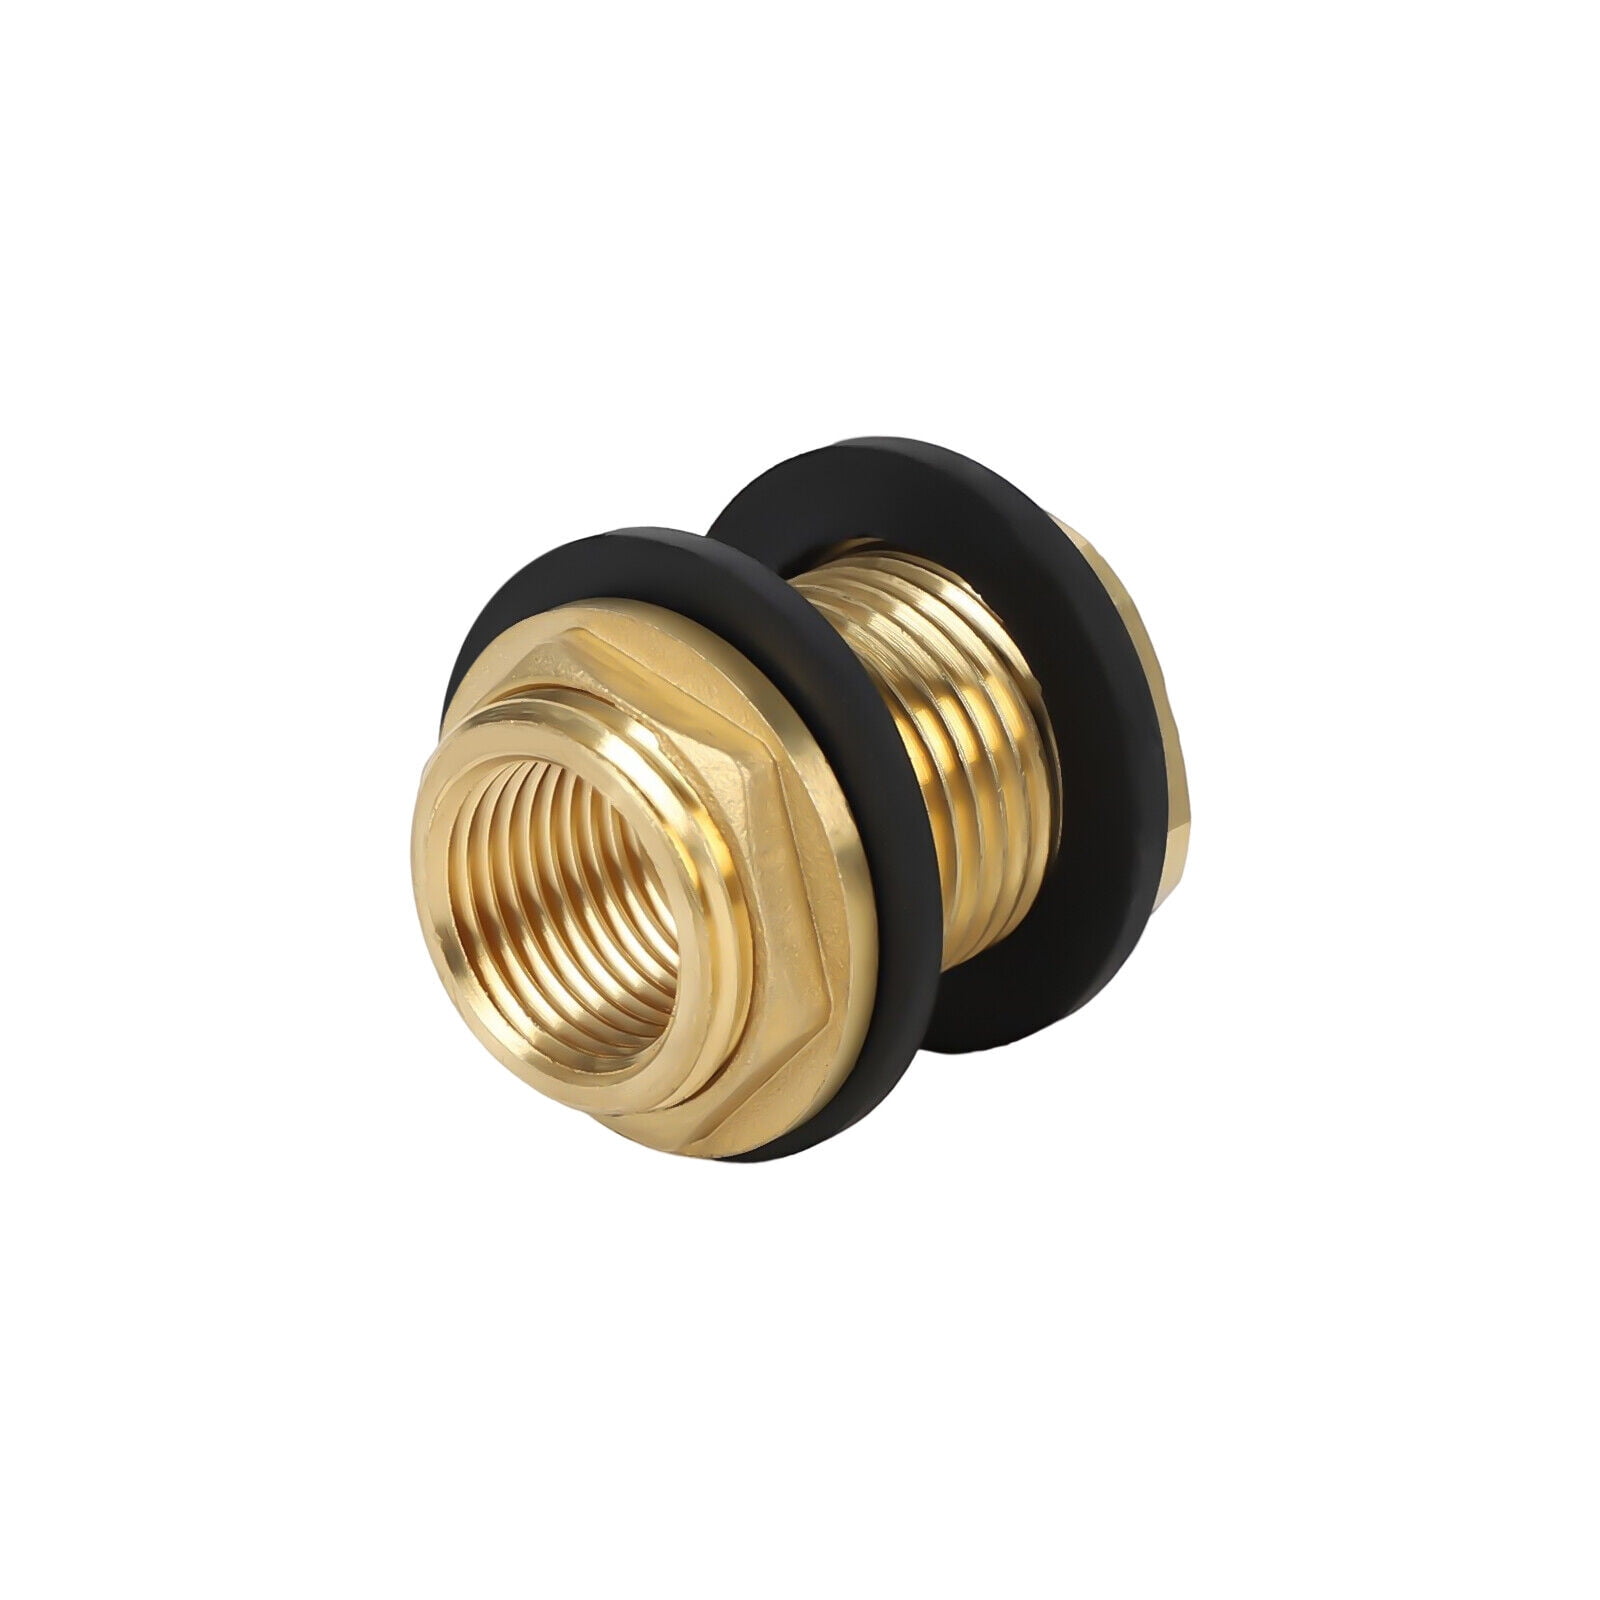 Miumaeov 2PCS Threaded Bulkhead Fitting Kit Brass Bulkhead 1/2 Female NPT  and 3/4 Male GHT Brass Water Tank Connector with Rubber Ring Hose Adapter  